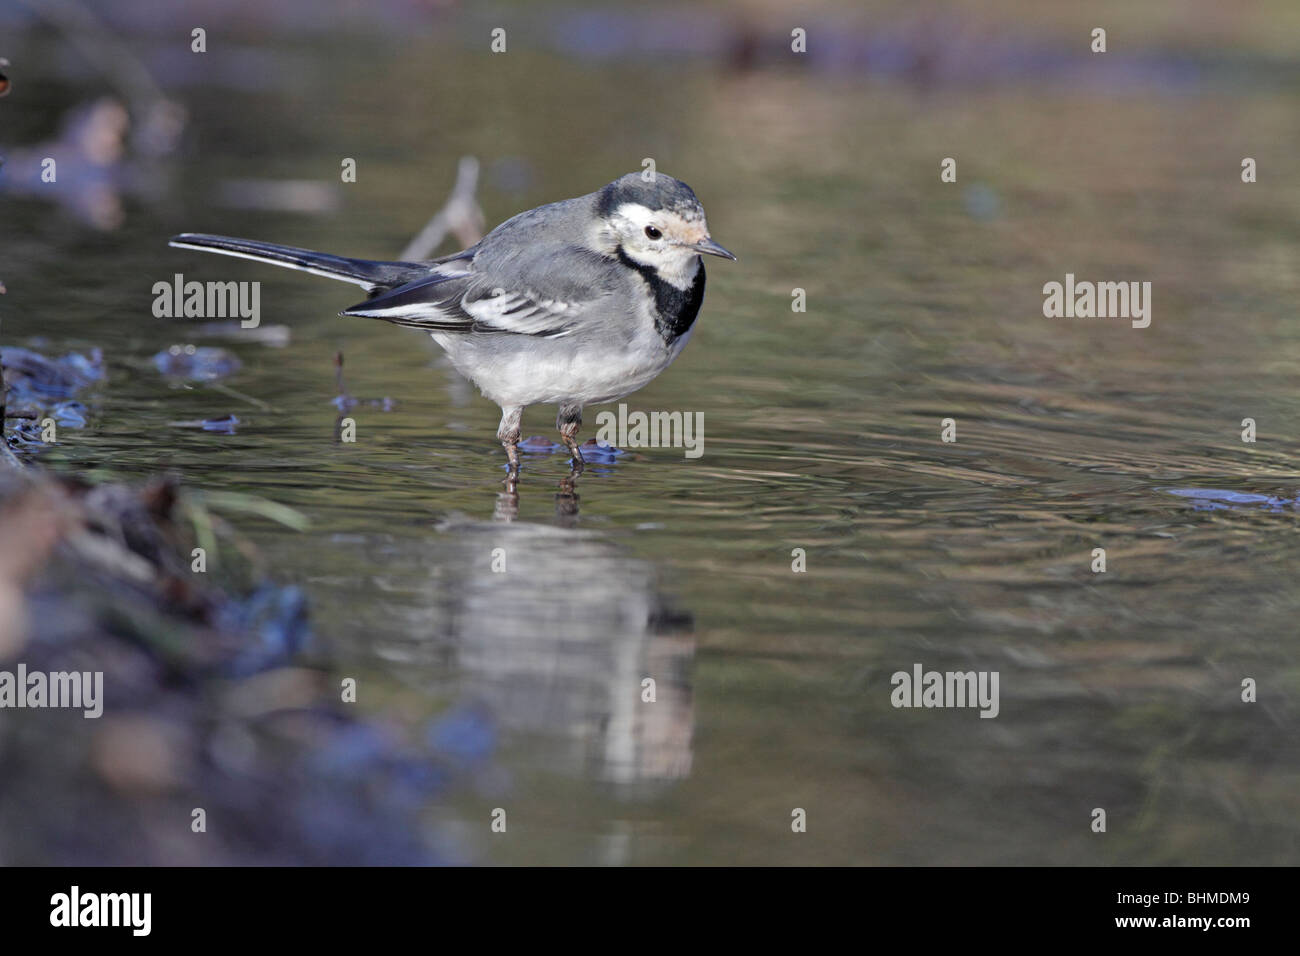 Pied Wagtail standing in water Stock Photo